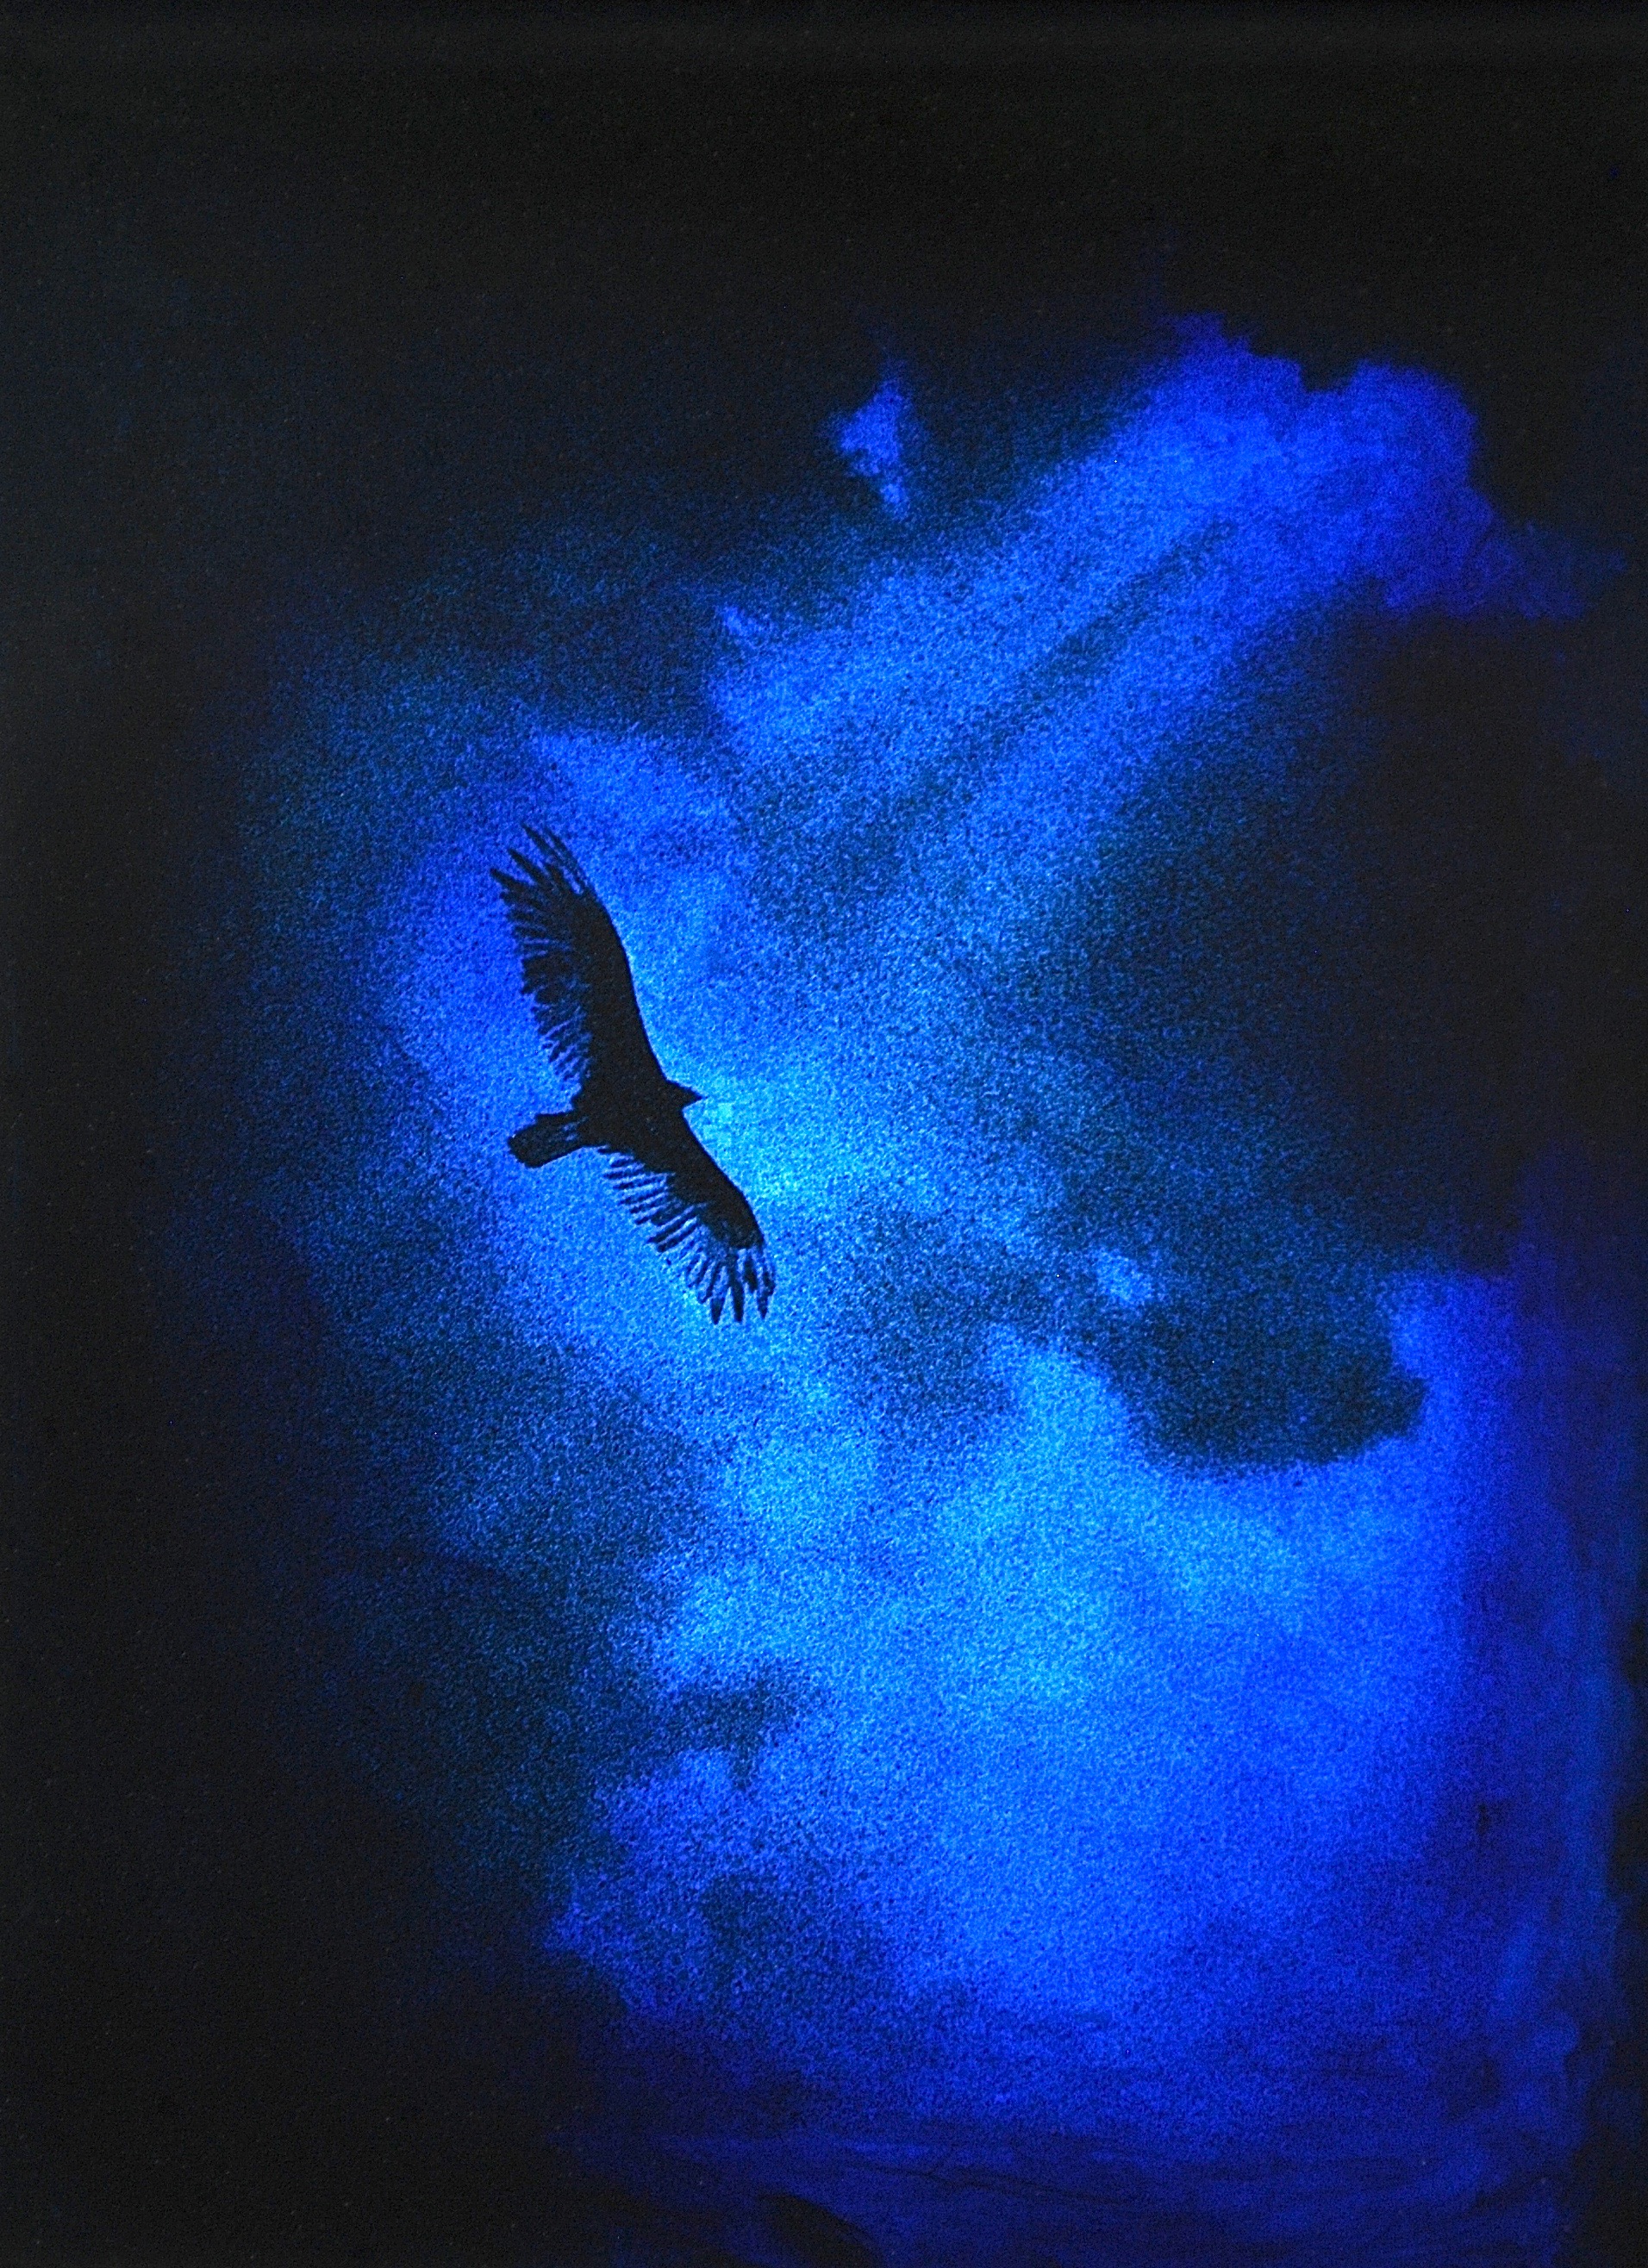 Julia King - Blue Vulture (detail), 13"h x 11"w x 1 3/4"d, photography based 3-d mixed media, resin, pigment, handmade wood frame